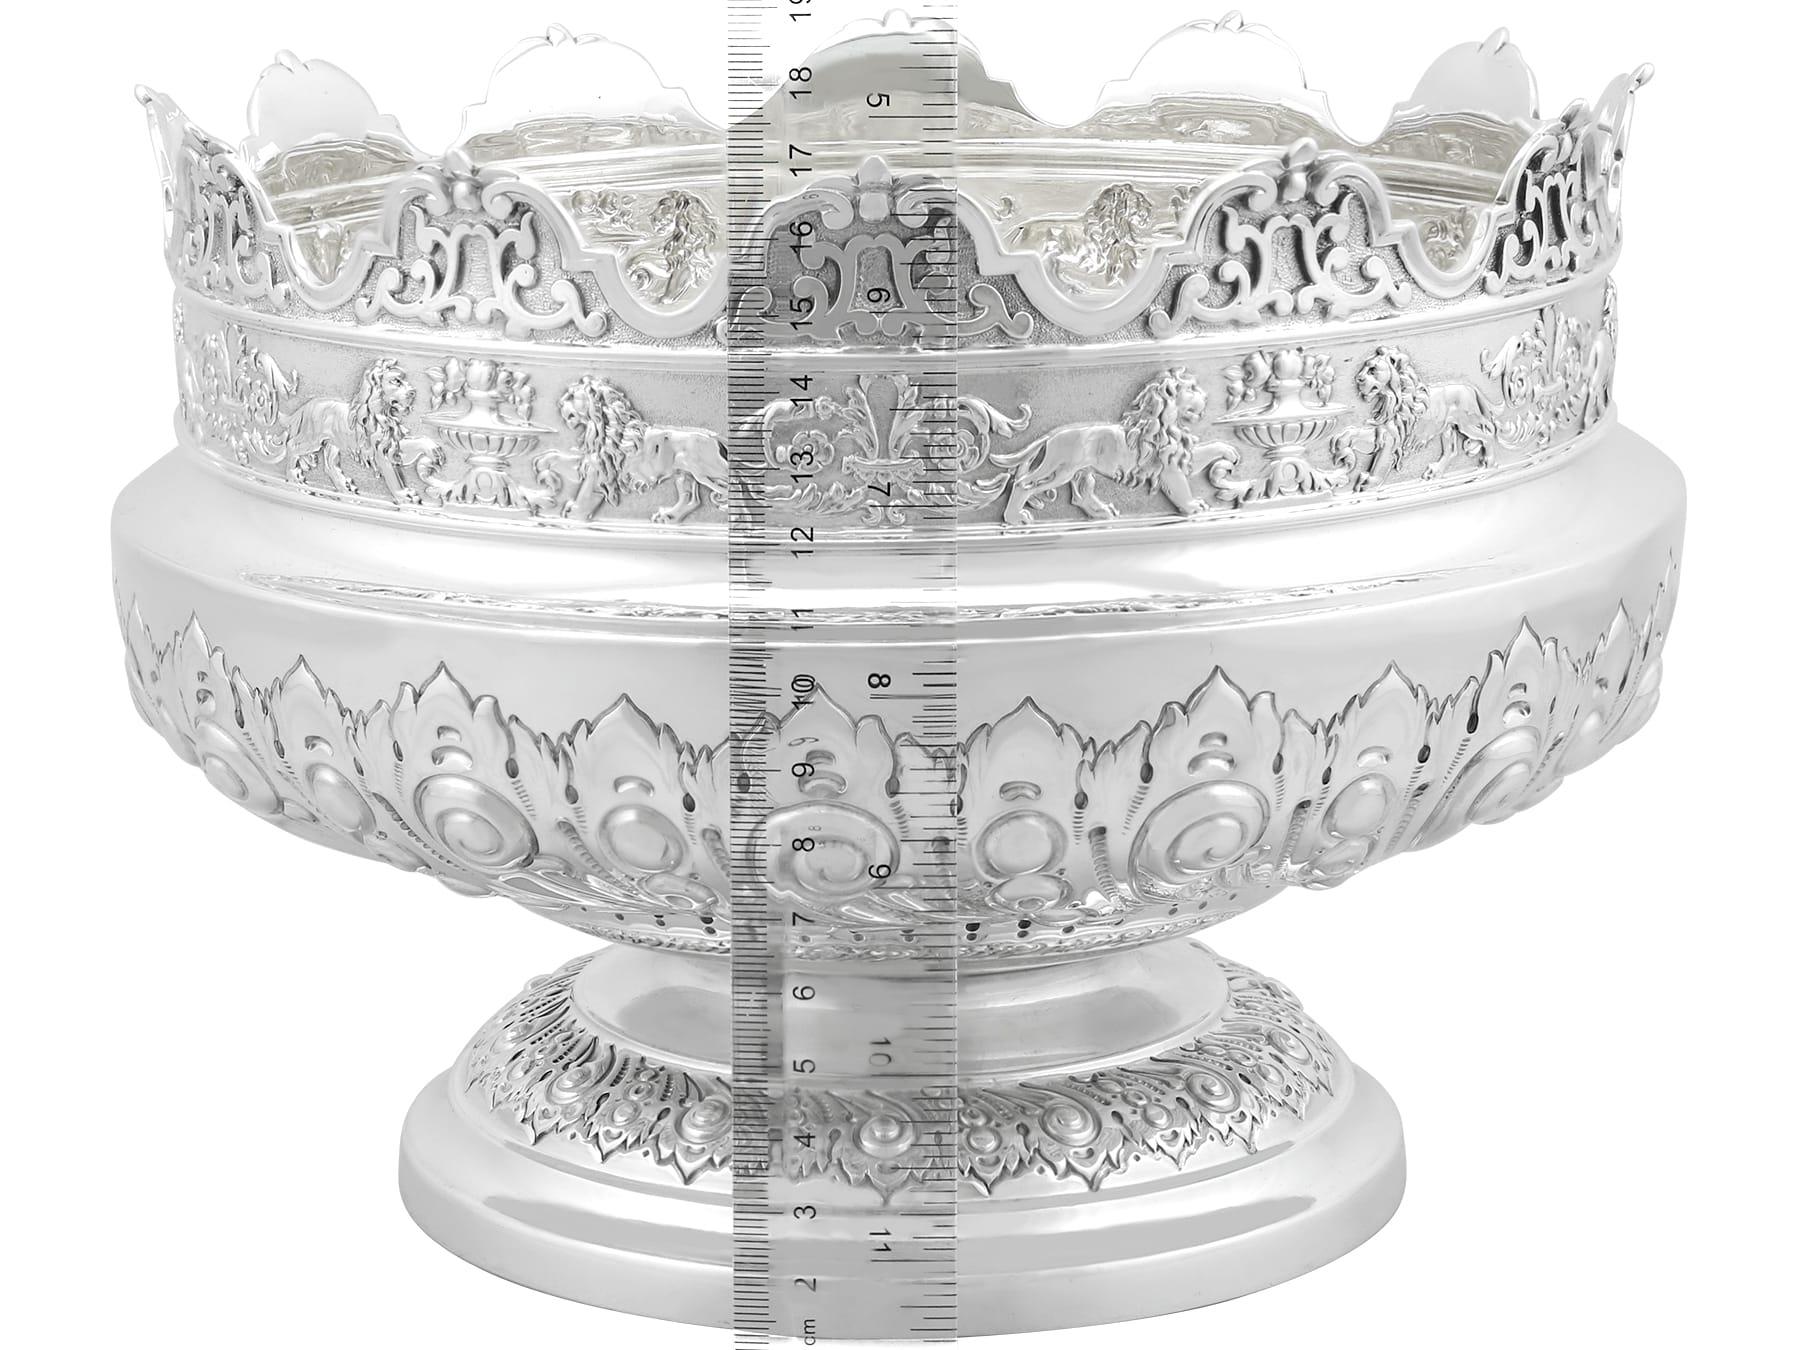 Antique Sterling Silver Presentation Bowl Monteith Style Victorian (1899) For Sale 4